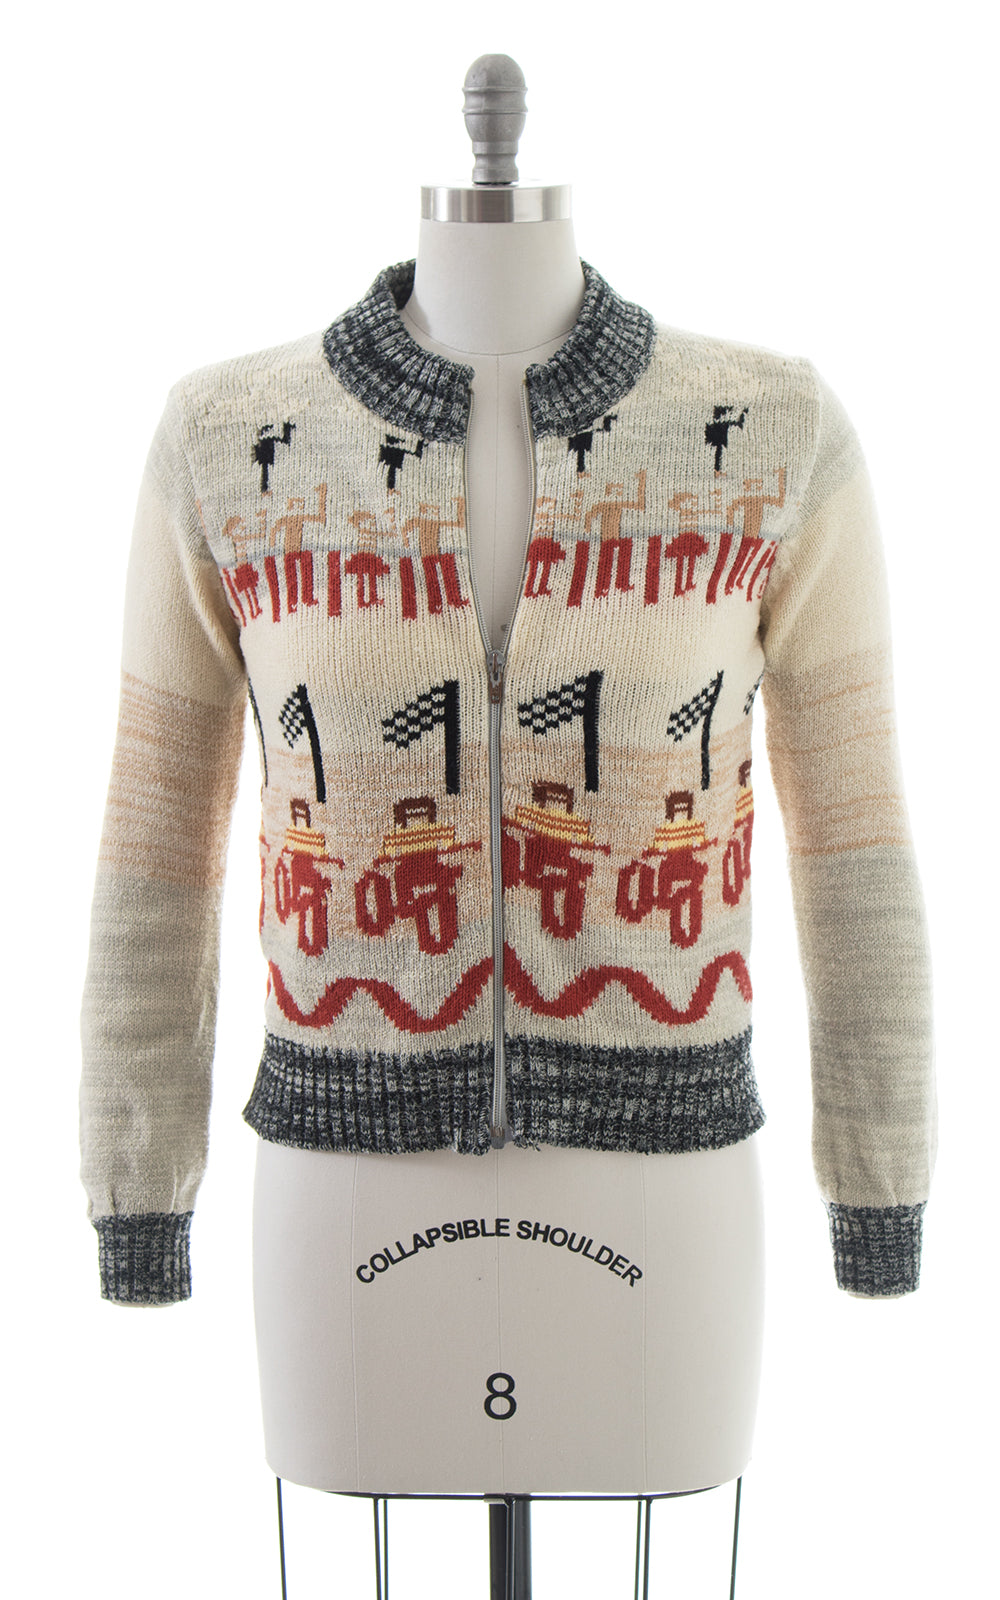 1970s Motorcycle Race Novelty Sweater